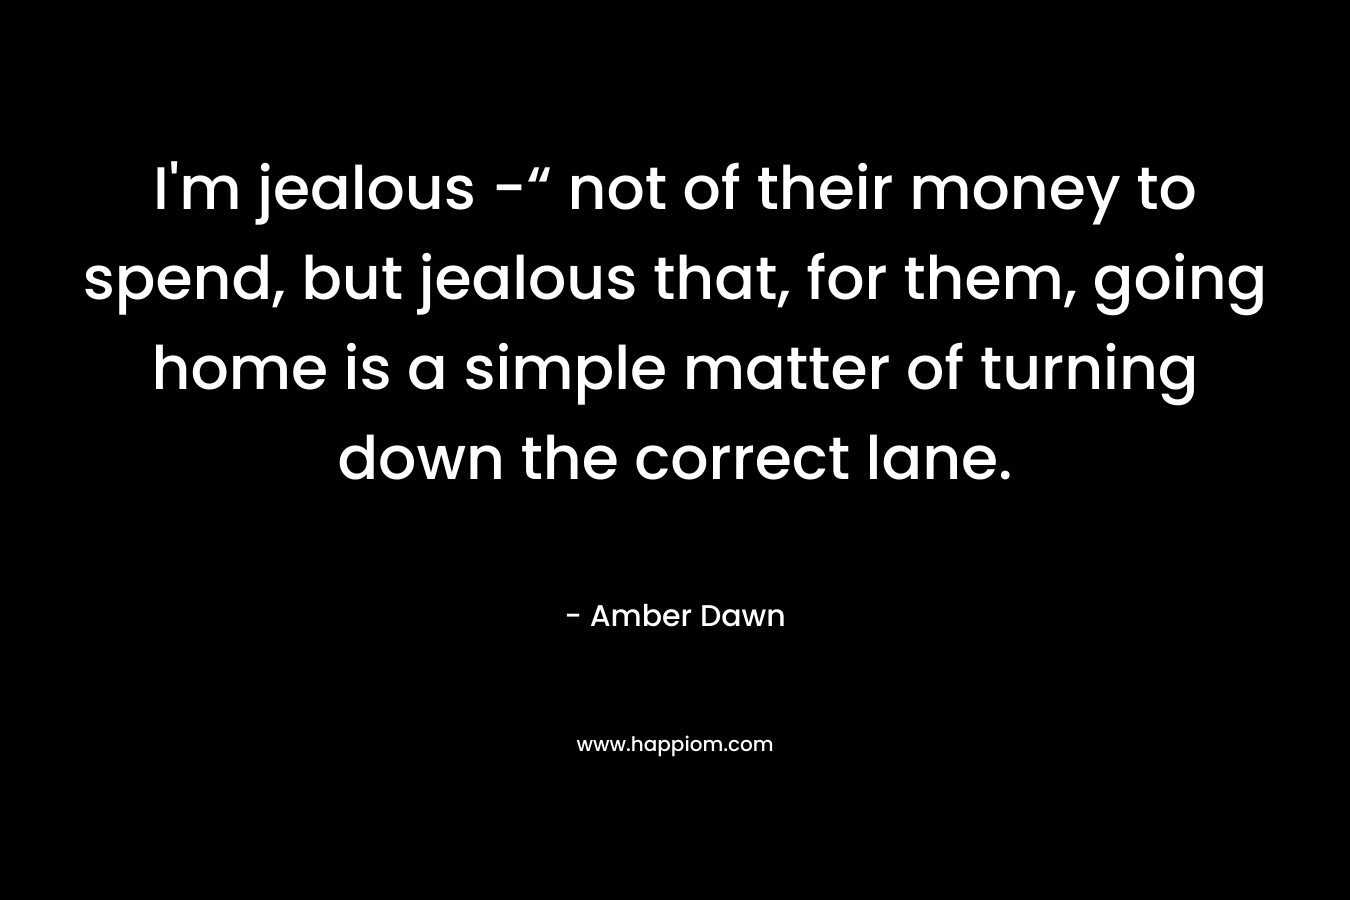 I’m jealous -“ not of their money to spend, but jealous that, for them, going home is a simple matter of turning down the correct lane. – Amber Dawn